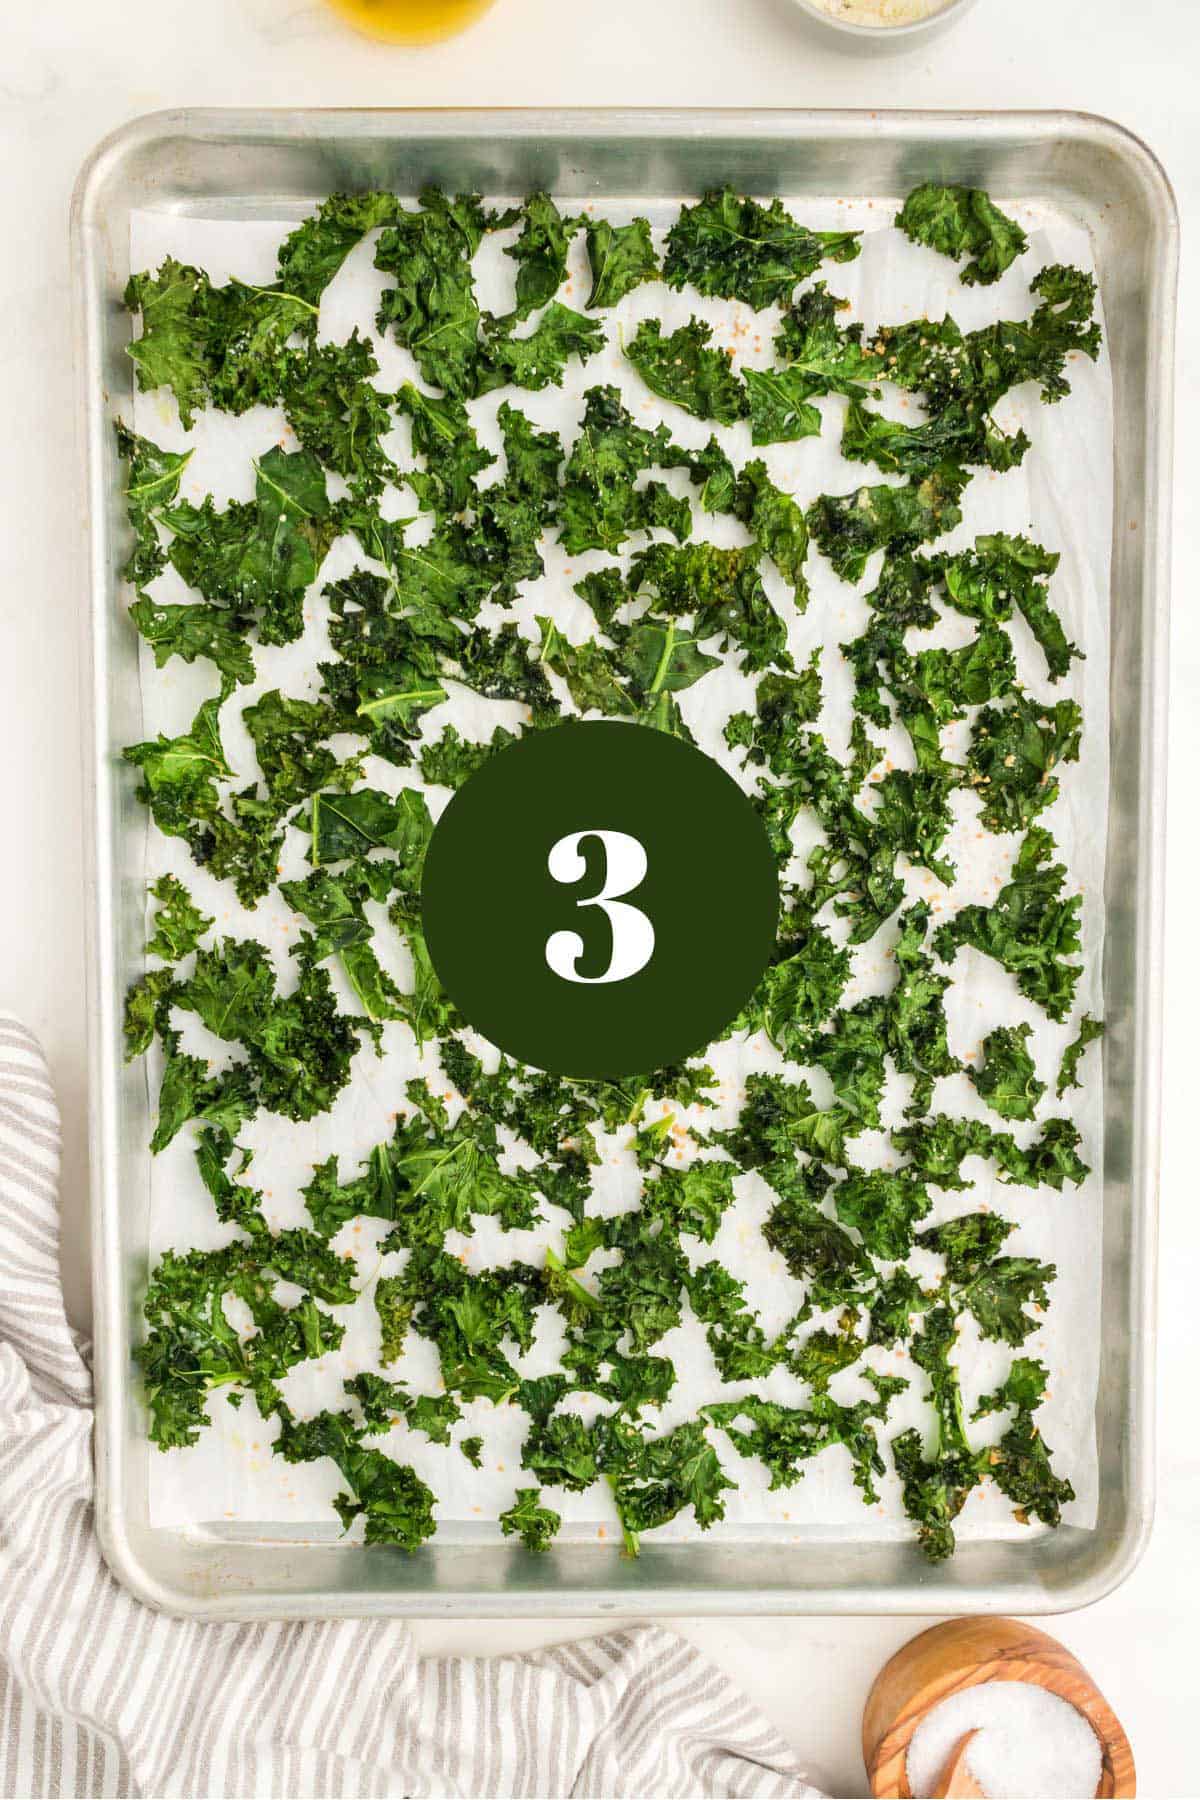 A baking sheet of kale chips with salt.